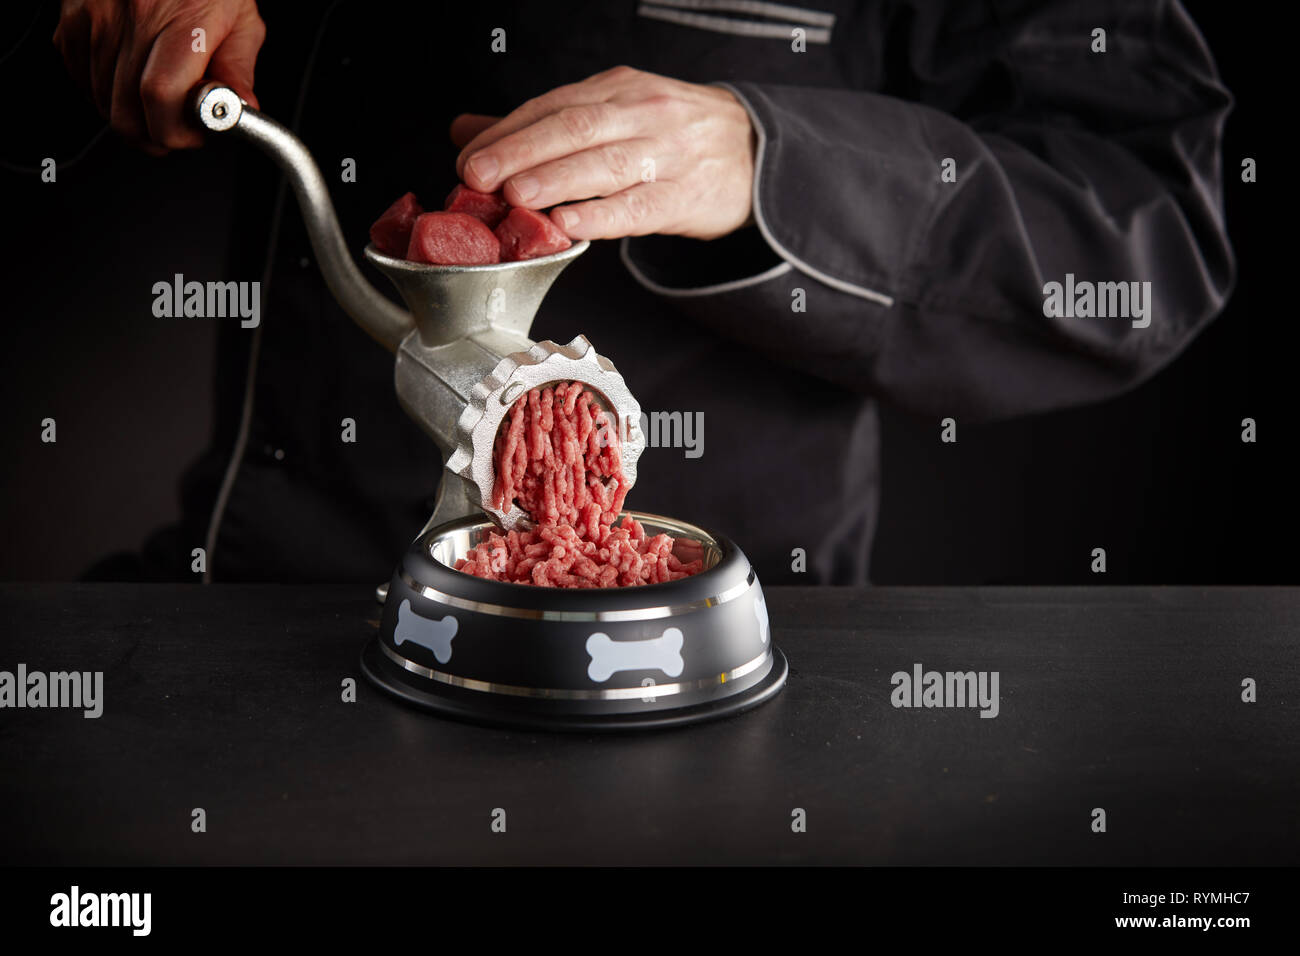 https://c8.alamy.com/comp/RYMHC7/man-making-minced-meat-for-dog-pushing-it-through-old-metal-manual-meat-grinder-into-dog-bowl-viewed-against-black-background-in-close-up-RYMHC7.jpg